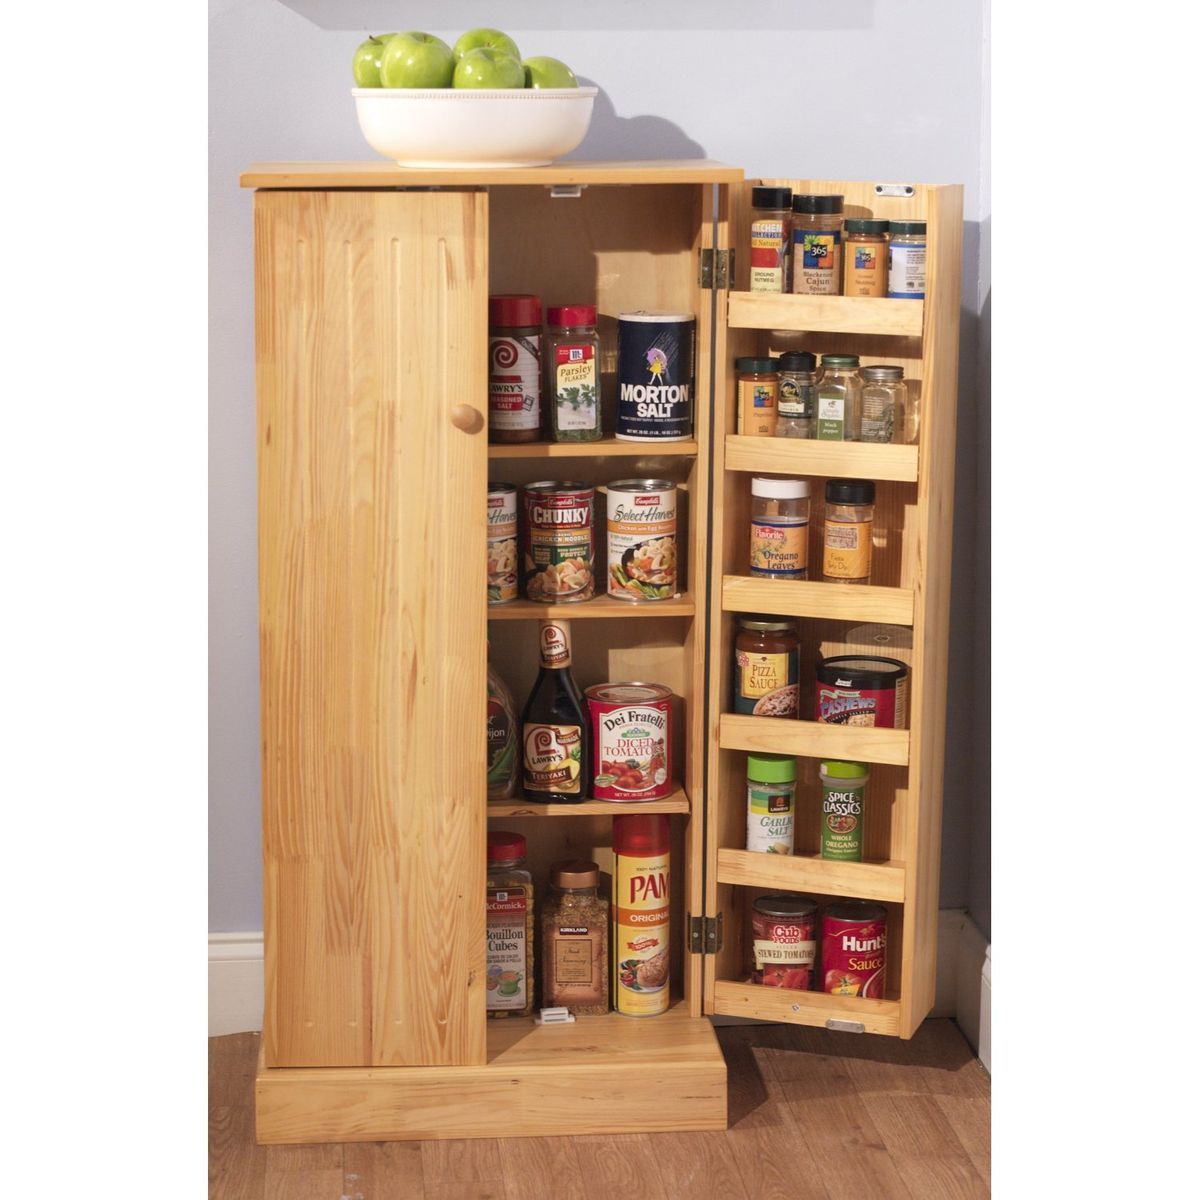   Utility Storage Pantry Cabinet Kitchen Food Storage Space Canned Goods